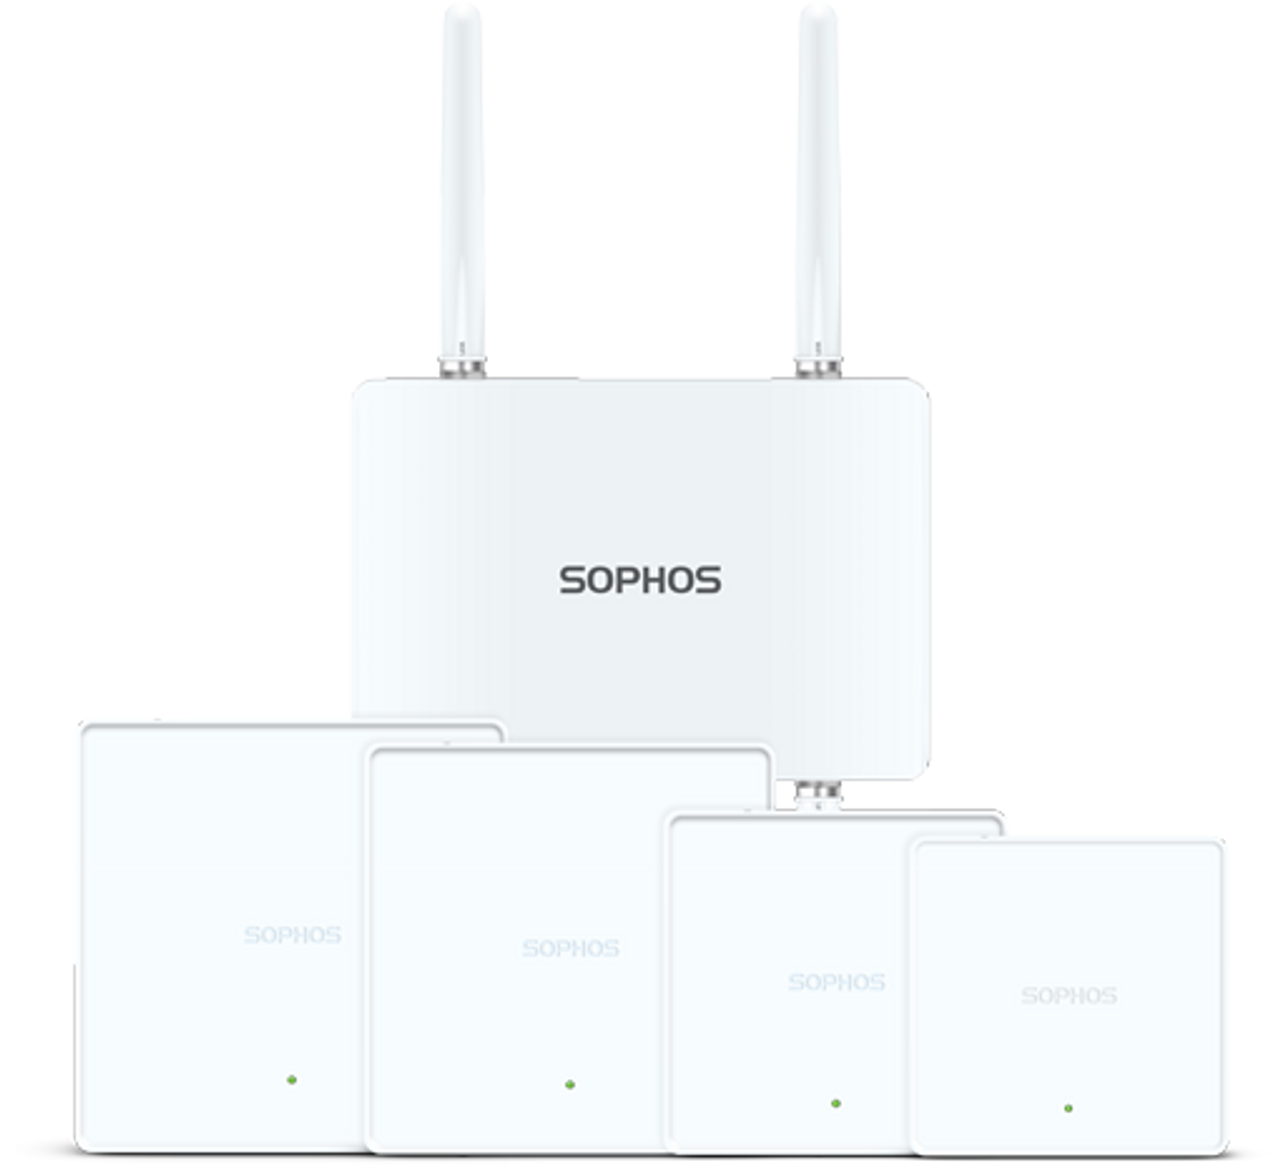 Sophos APX 740 plenum-rated Access Point (ROW) plain, no power adapter/PoE Injector